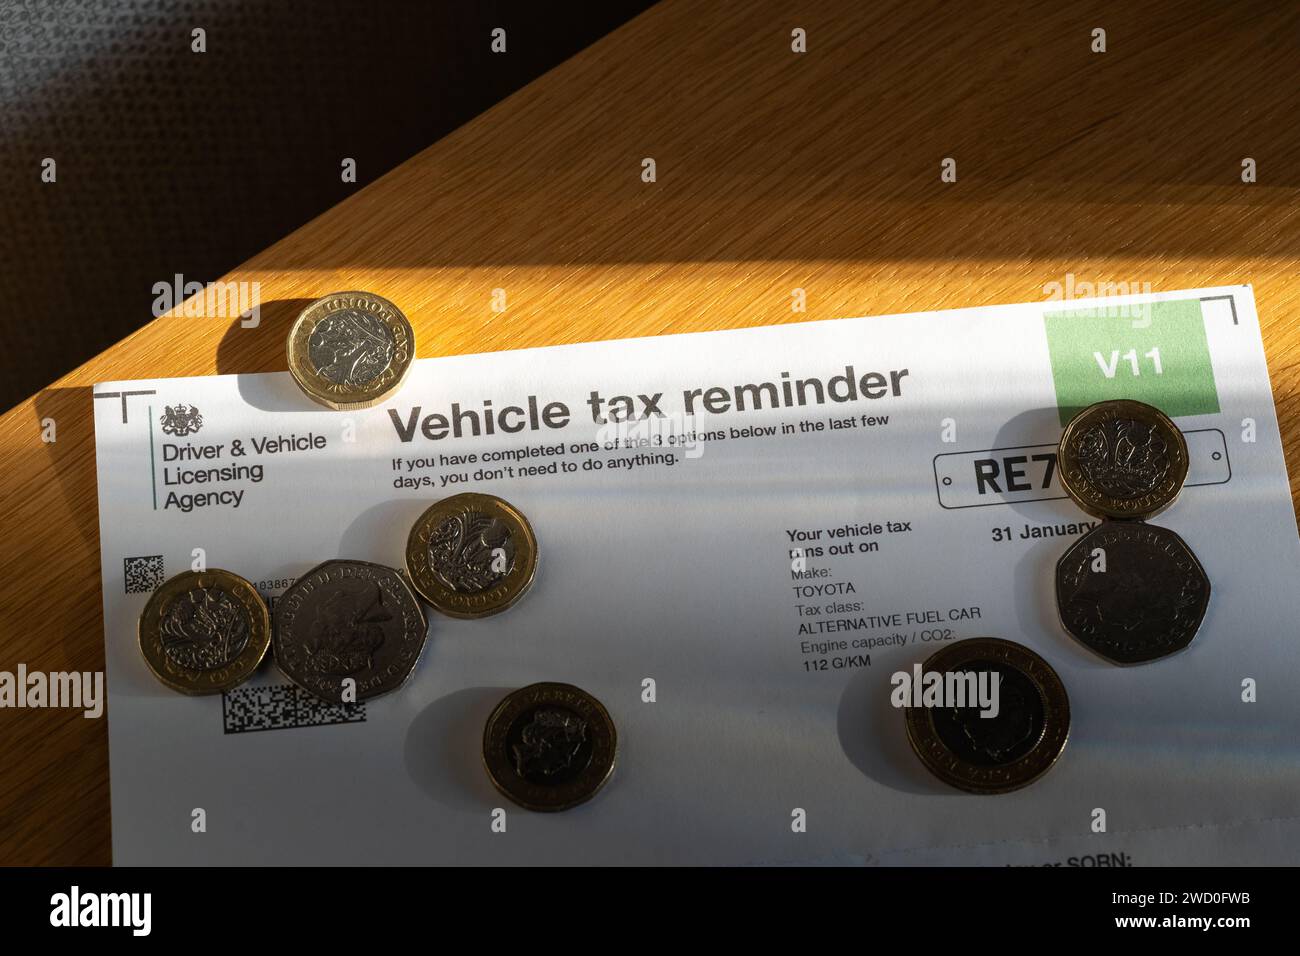 A V11 Vehicle Tax Reminder form sent from the DVLA to individual car owners in the UK, reminding them to tax their car / vehicle. England Stock Photo